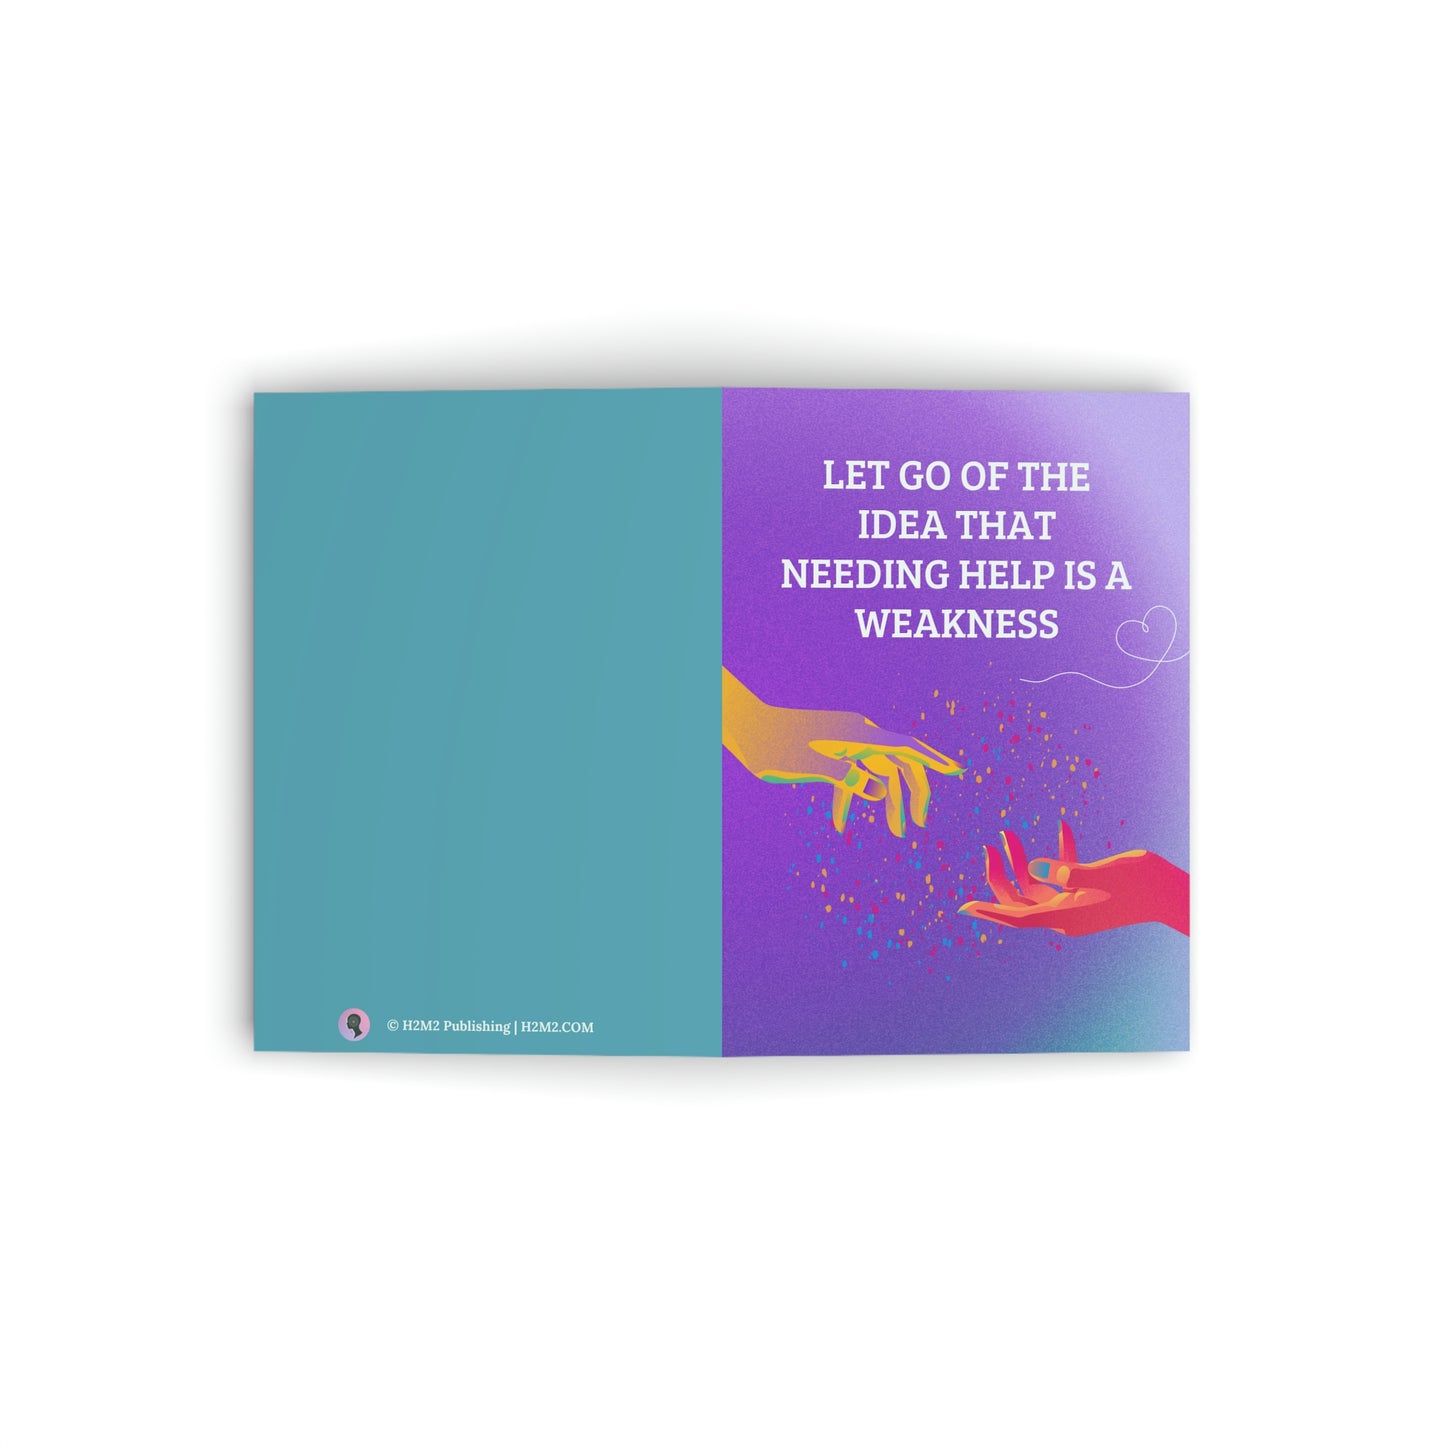 Ask For Help - Uncommon Greeting Cards for Common Occasions